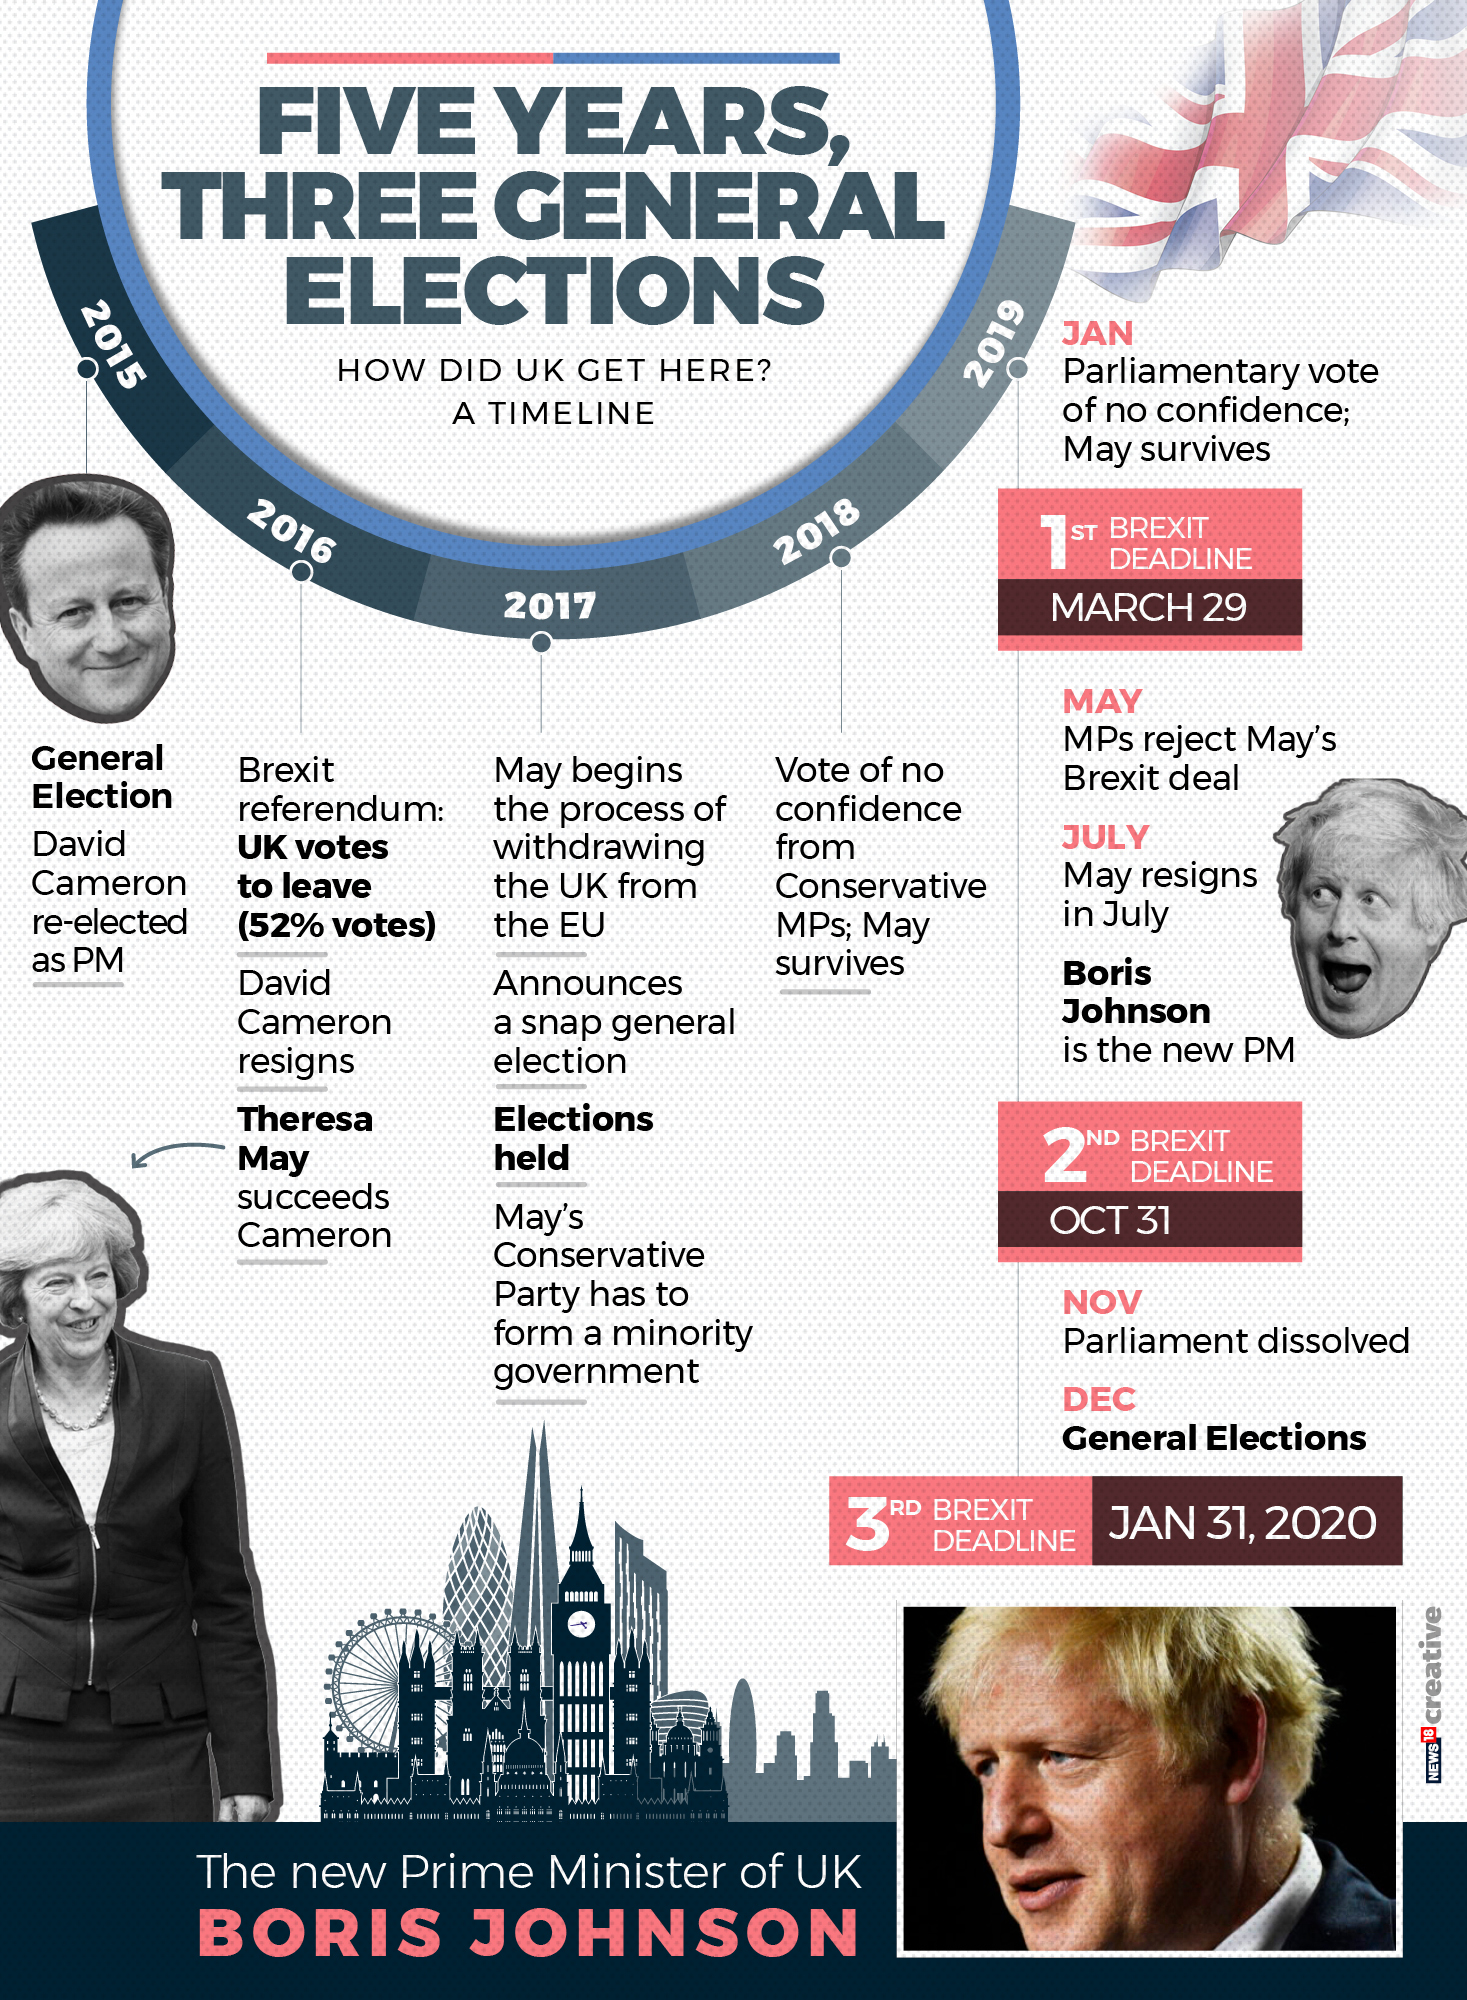 UK election results show Britain votes Brexit: What you need to know